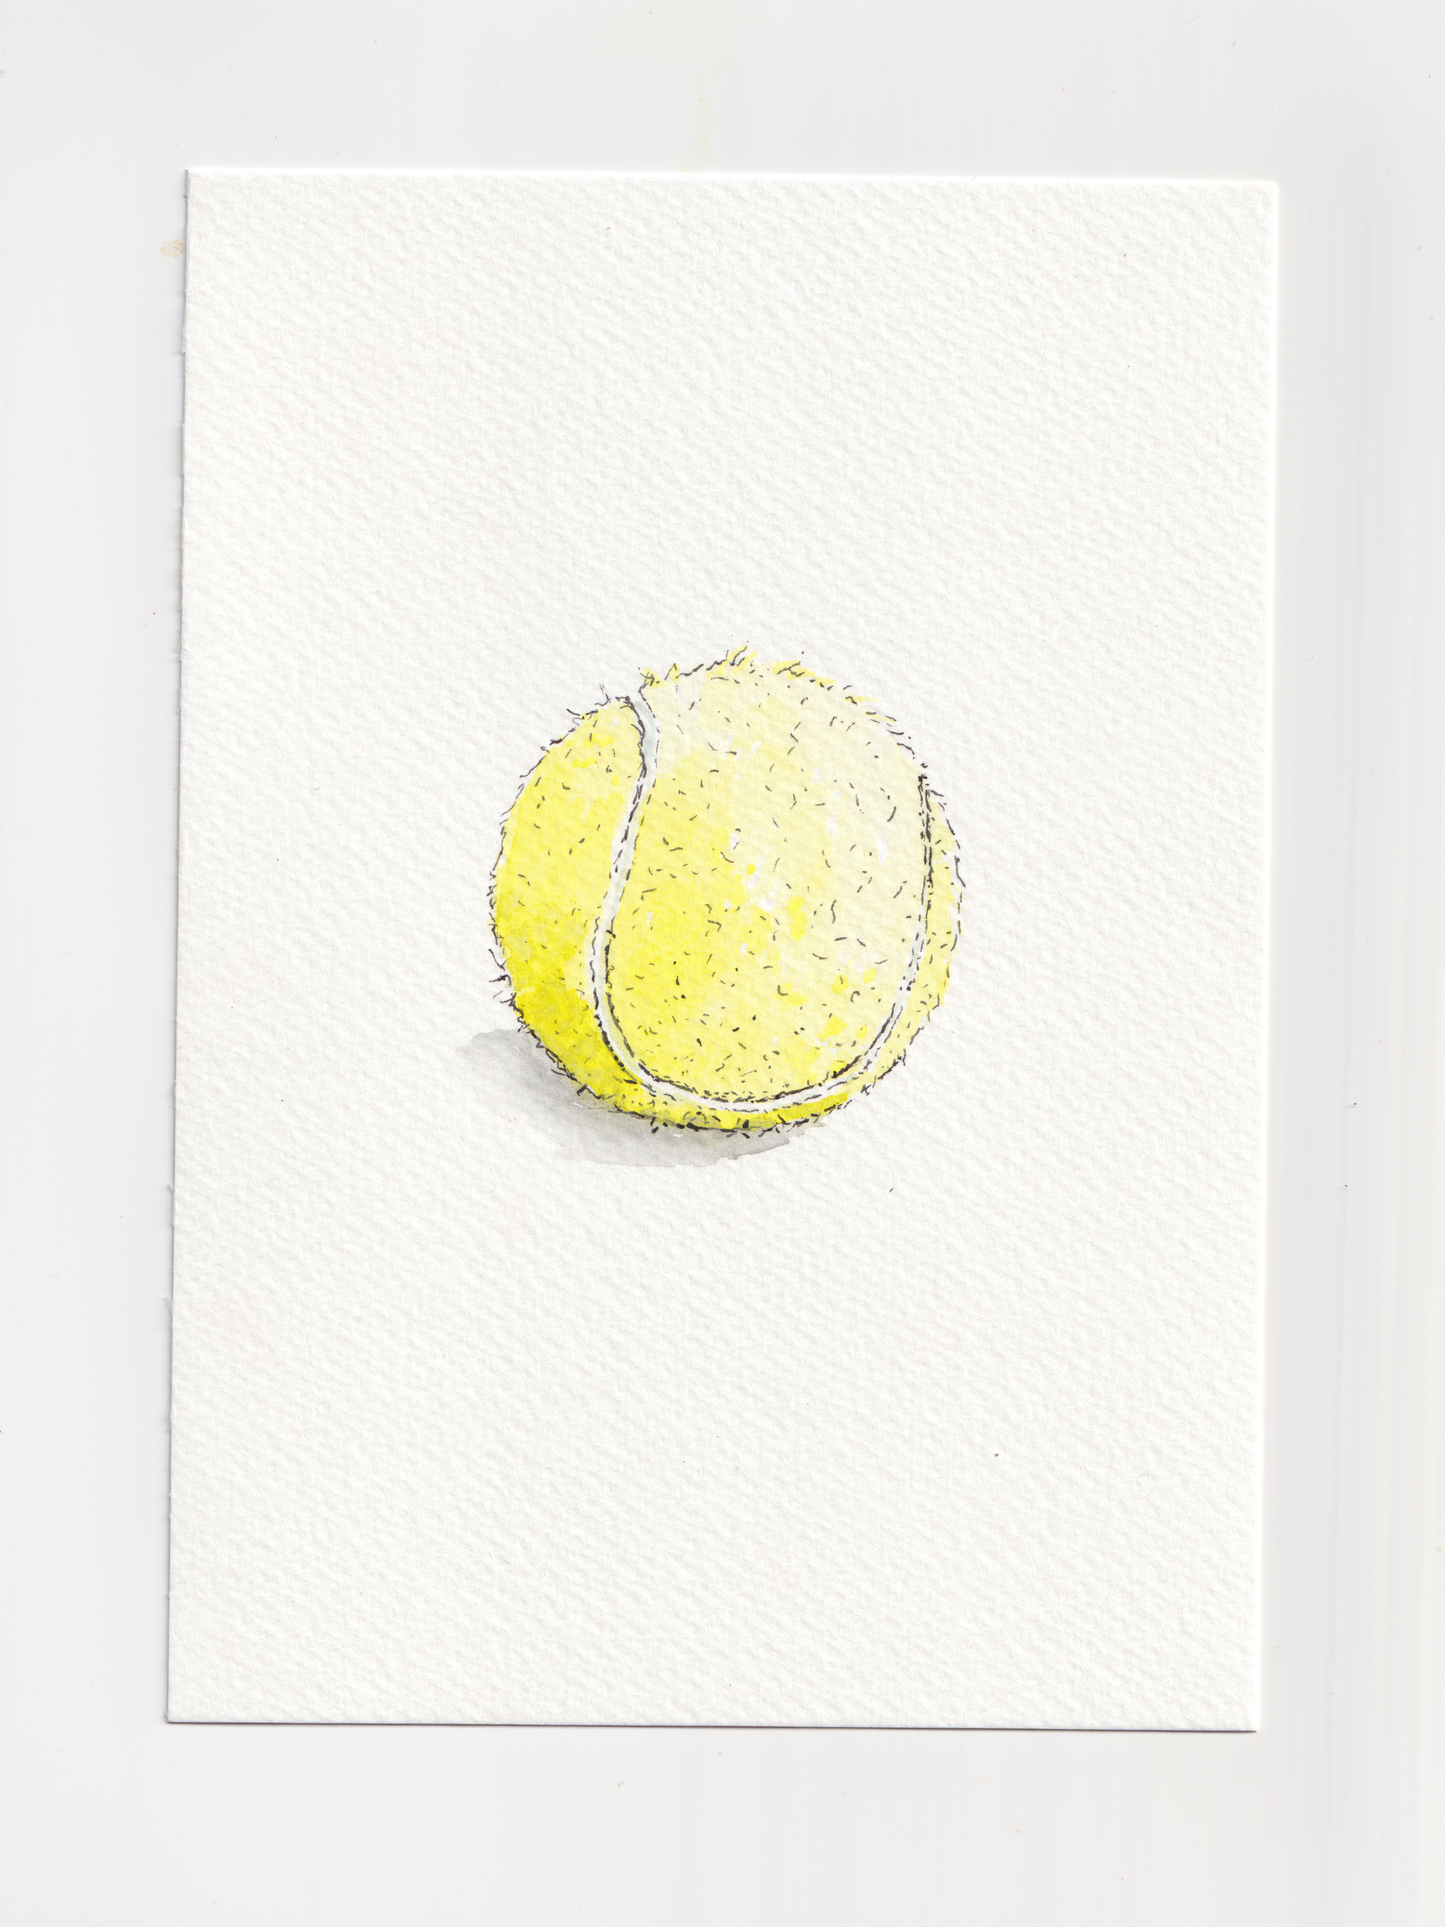 Daily Illustration - Day 5 - Tennis ball